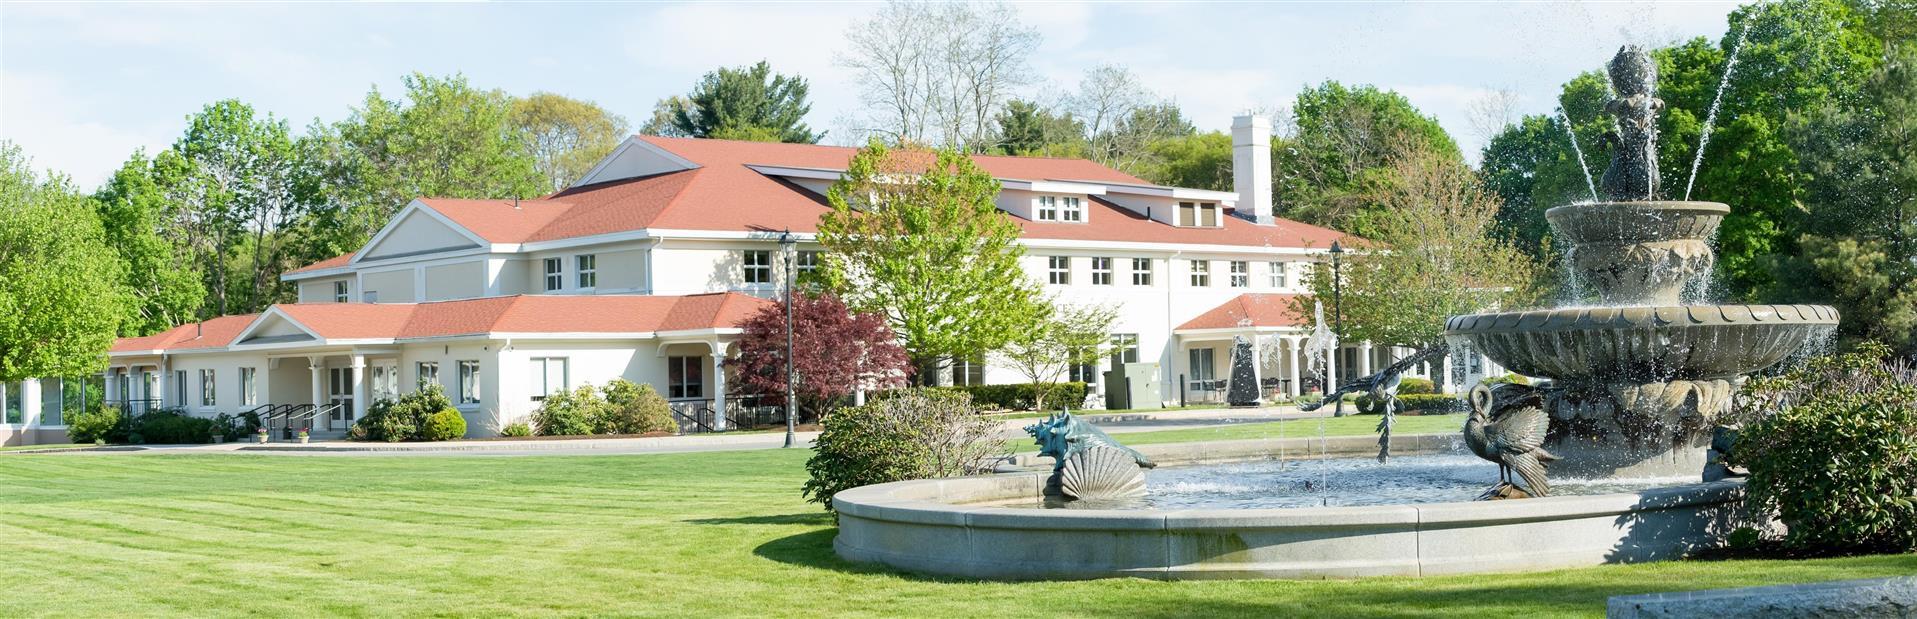 The Wylie Inn and Conference Center at Endicott College in Beverly, MA